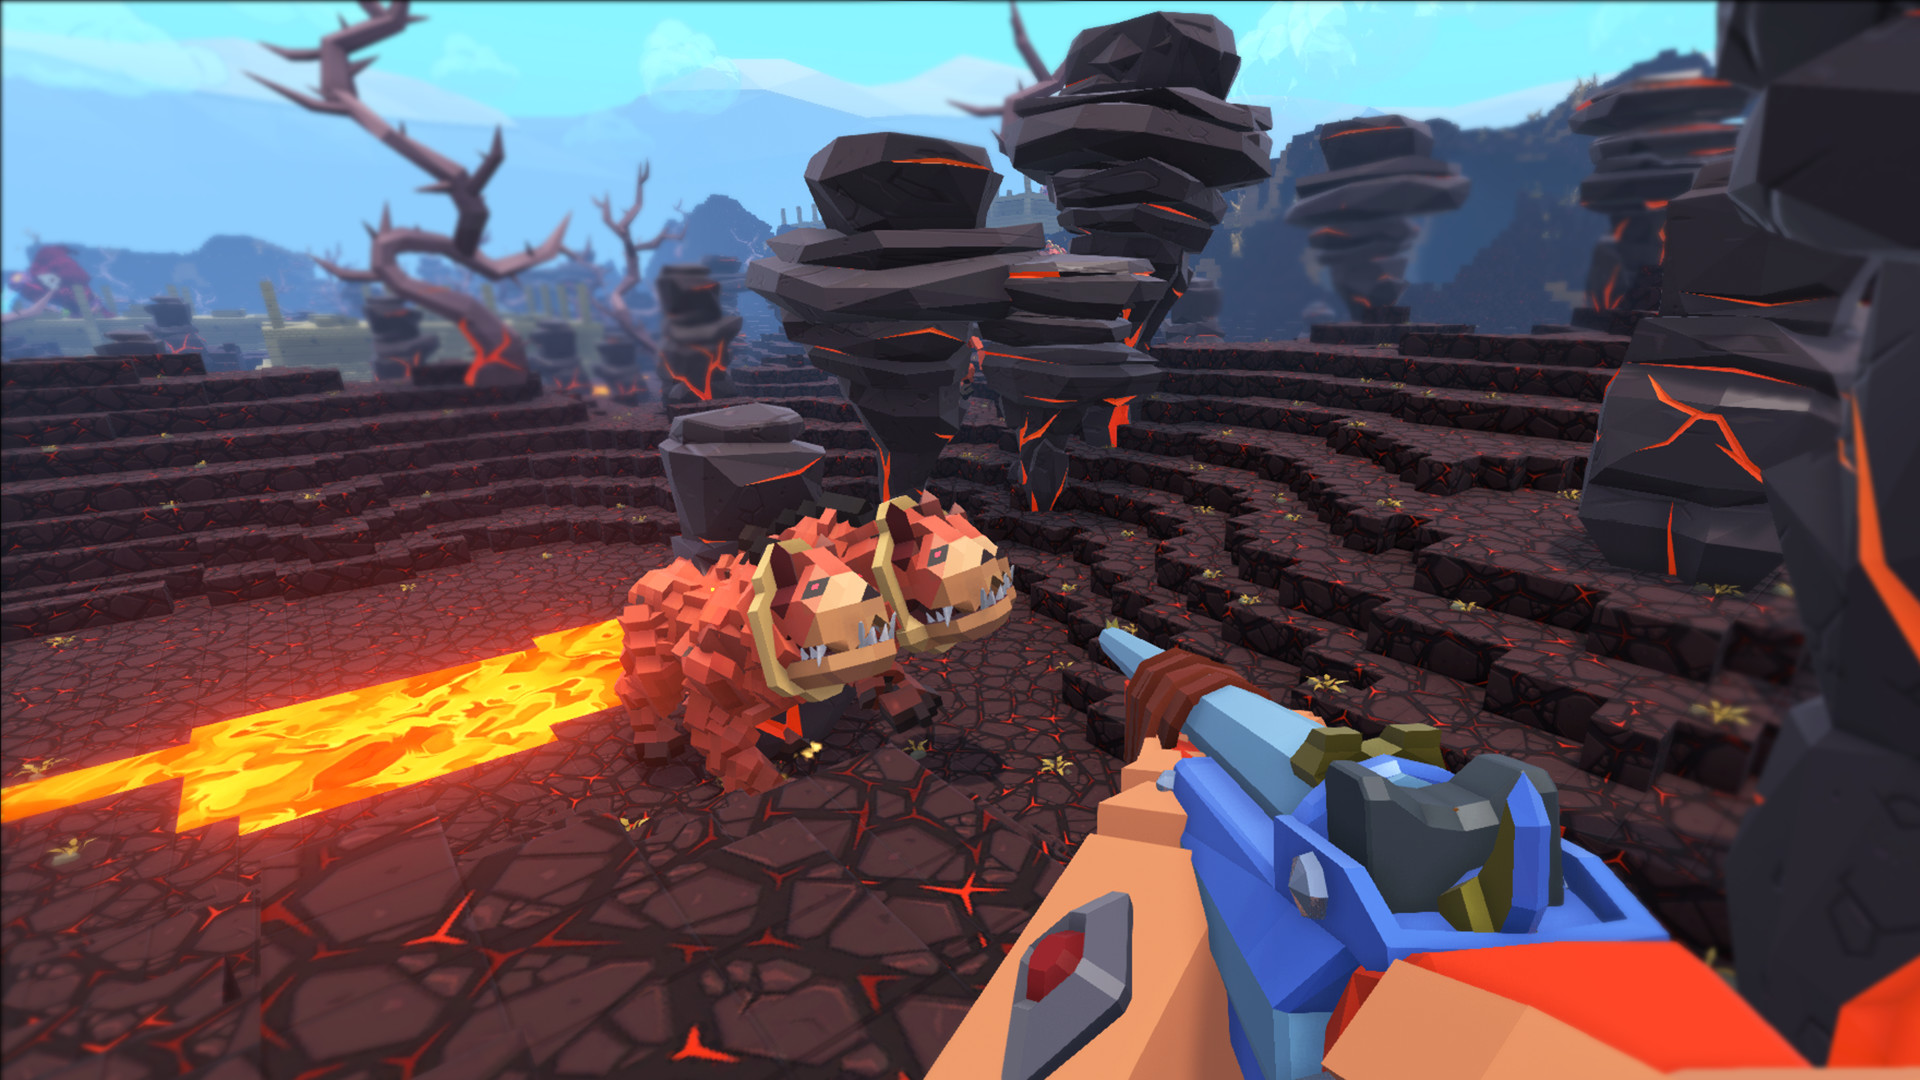 aiming down the sights at a two-headed creature standing by some lava in PixARK